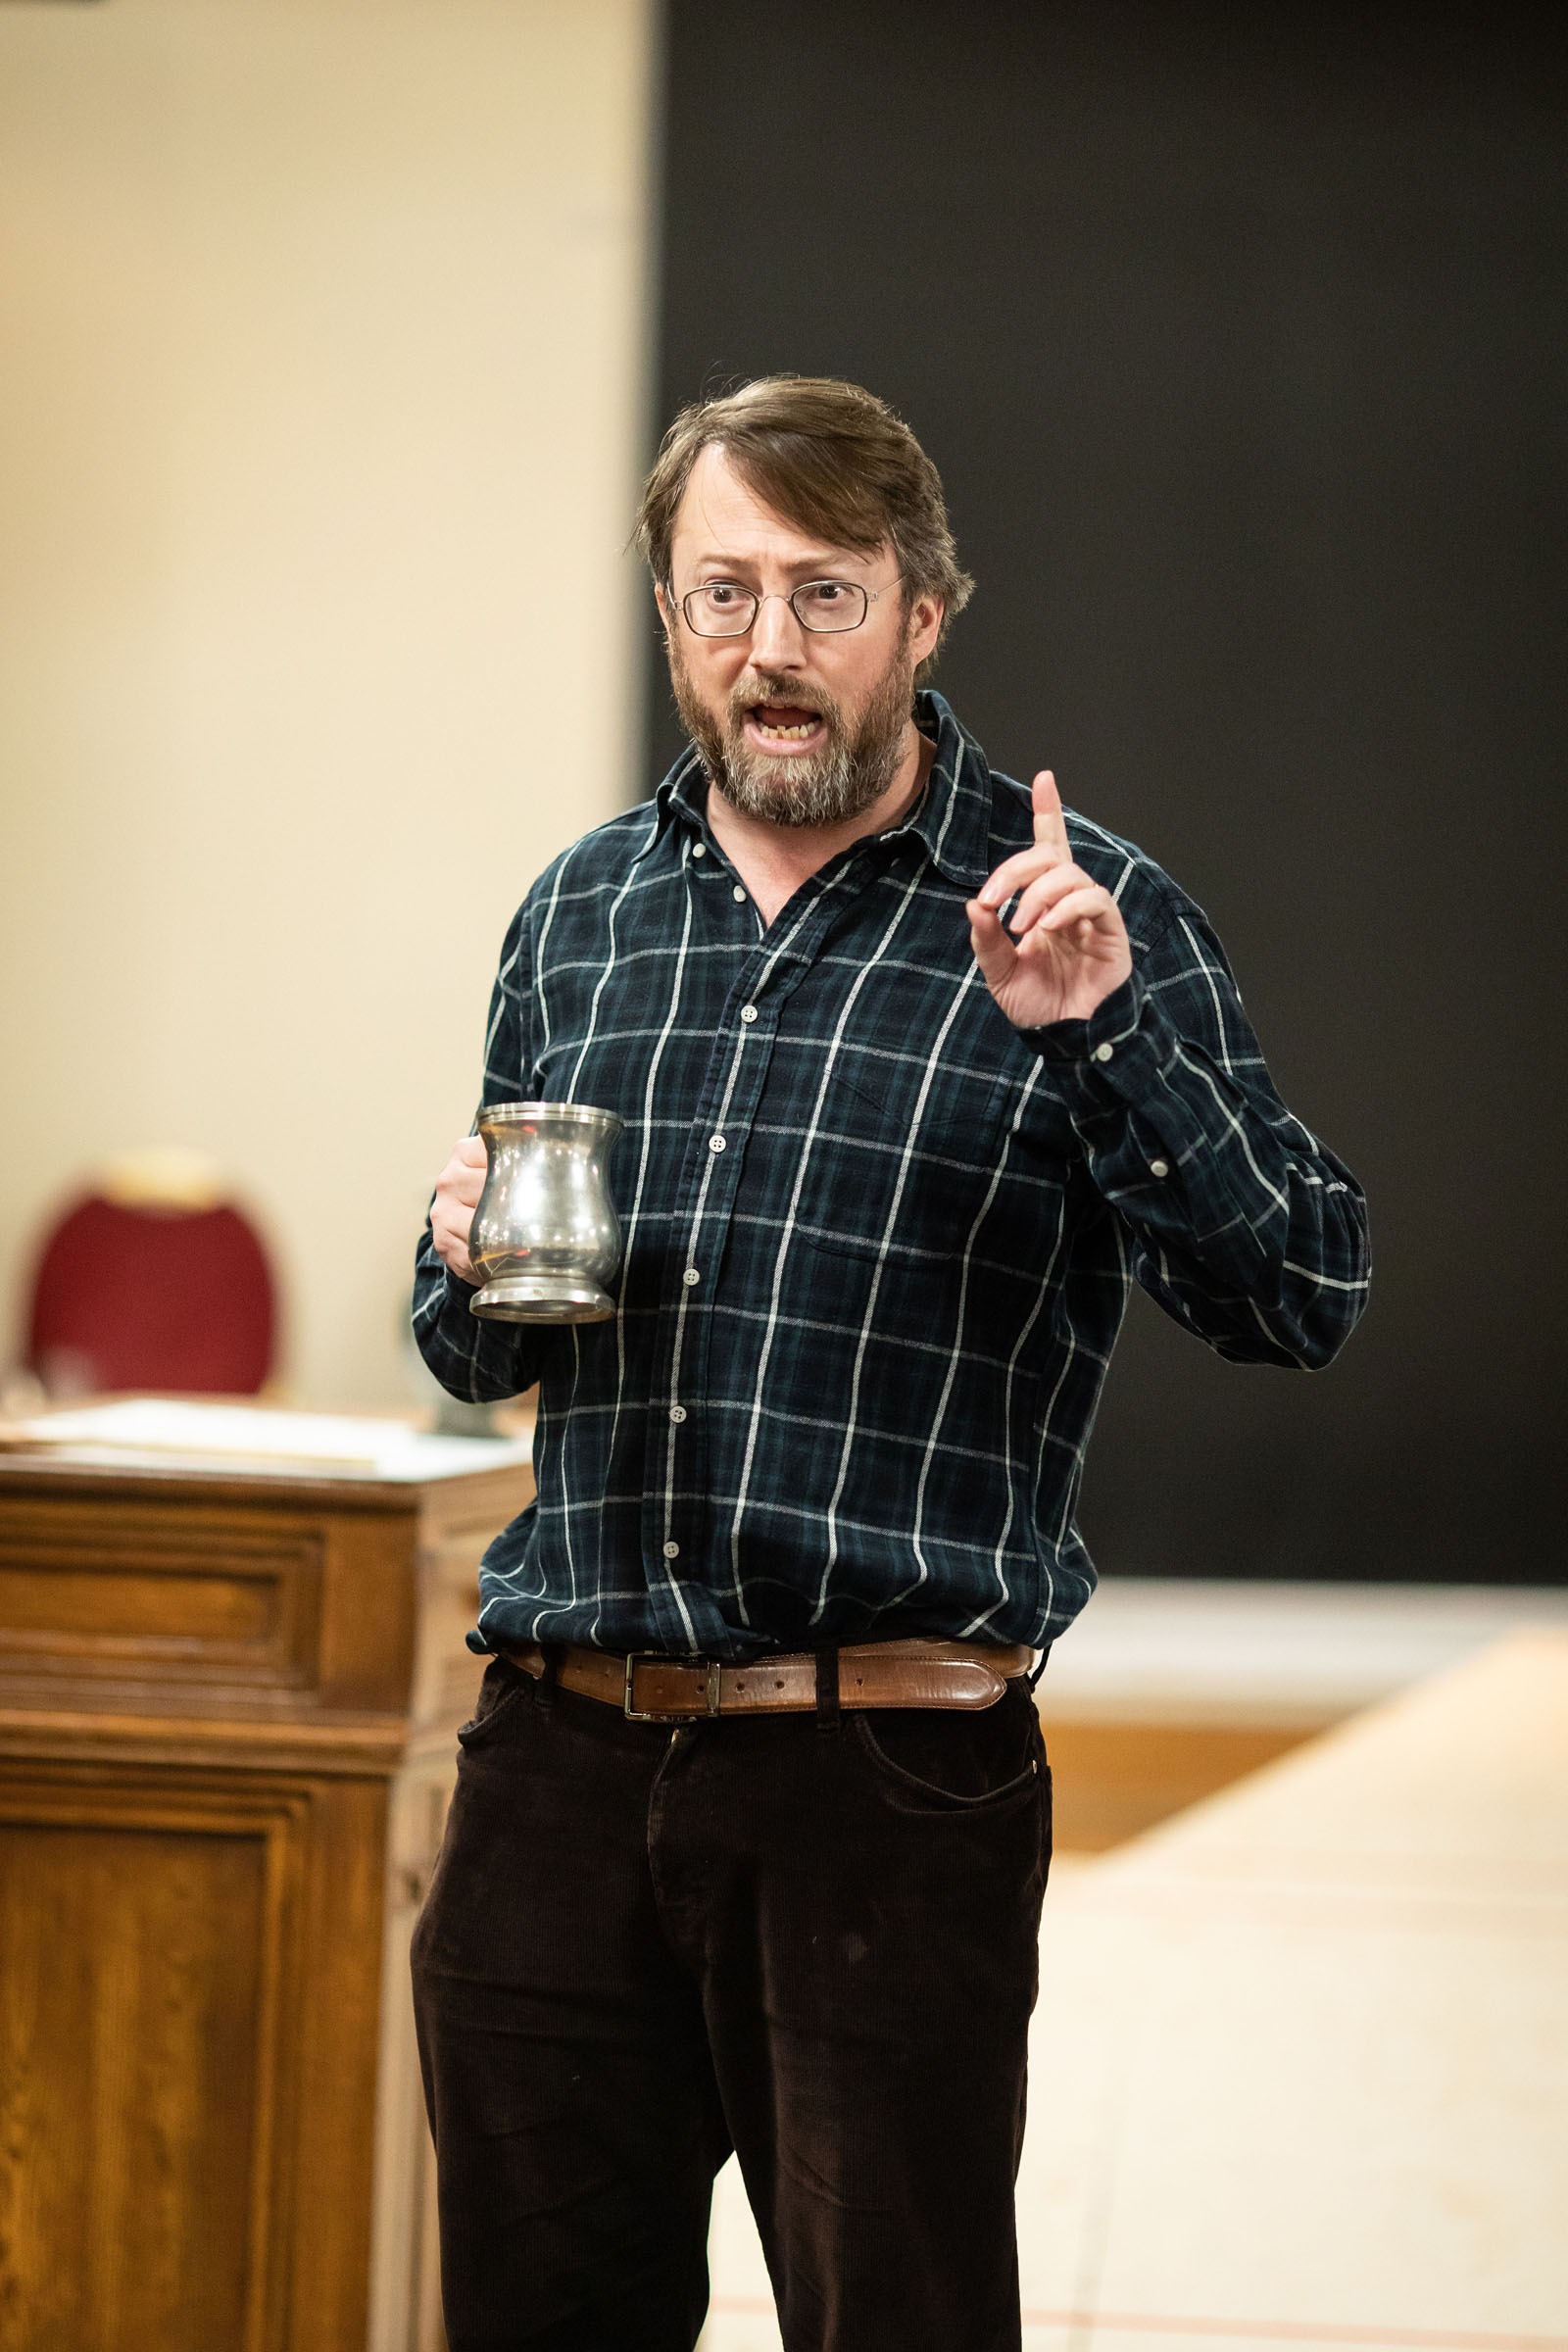 David Mitchell rehearsing his role as William Shakespeare